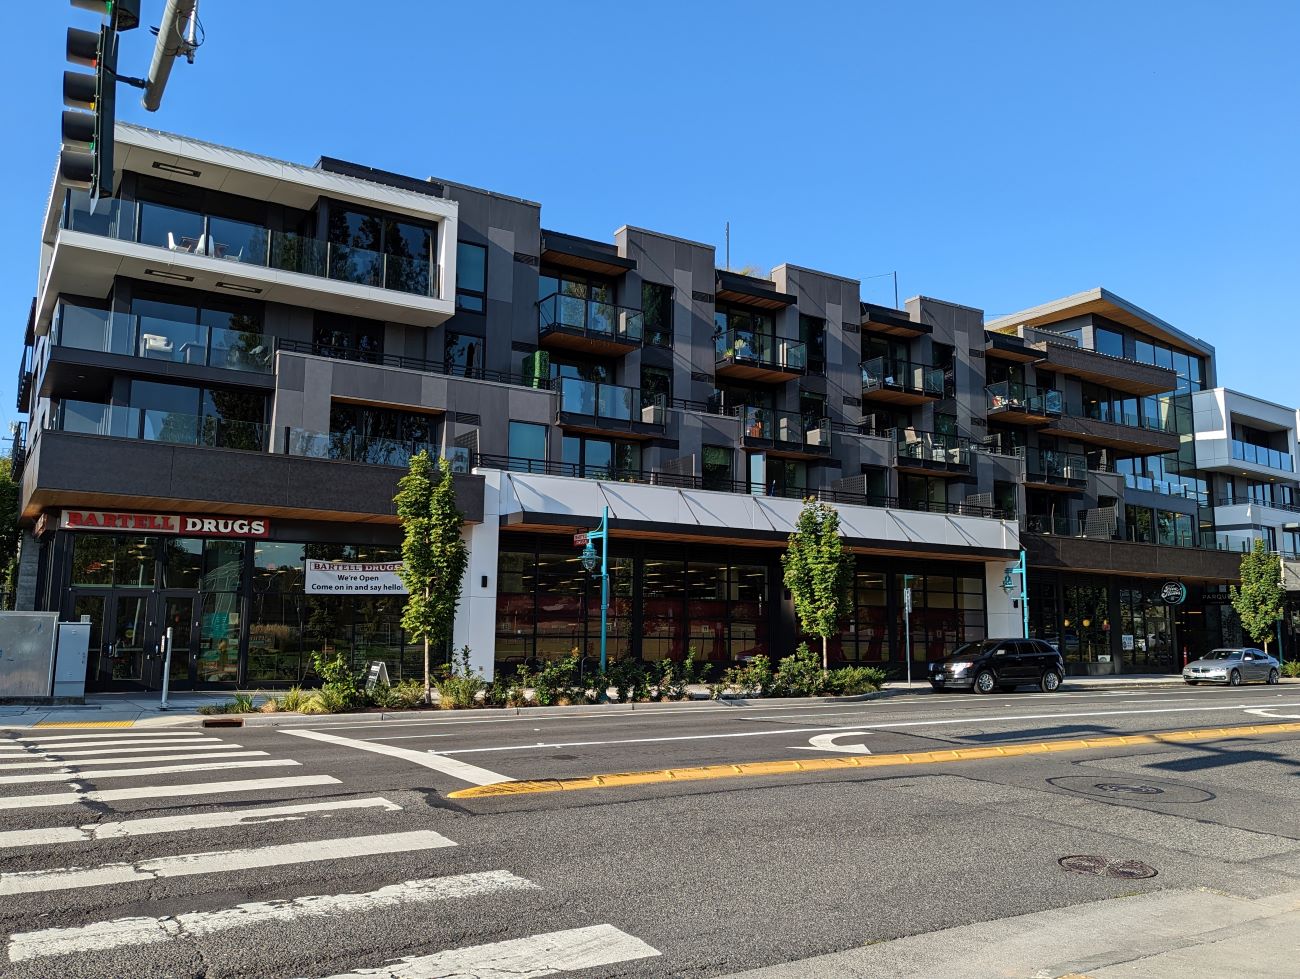 312 Central Way - Bartell's Mixed Use/Parque Kirkland Apartments